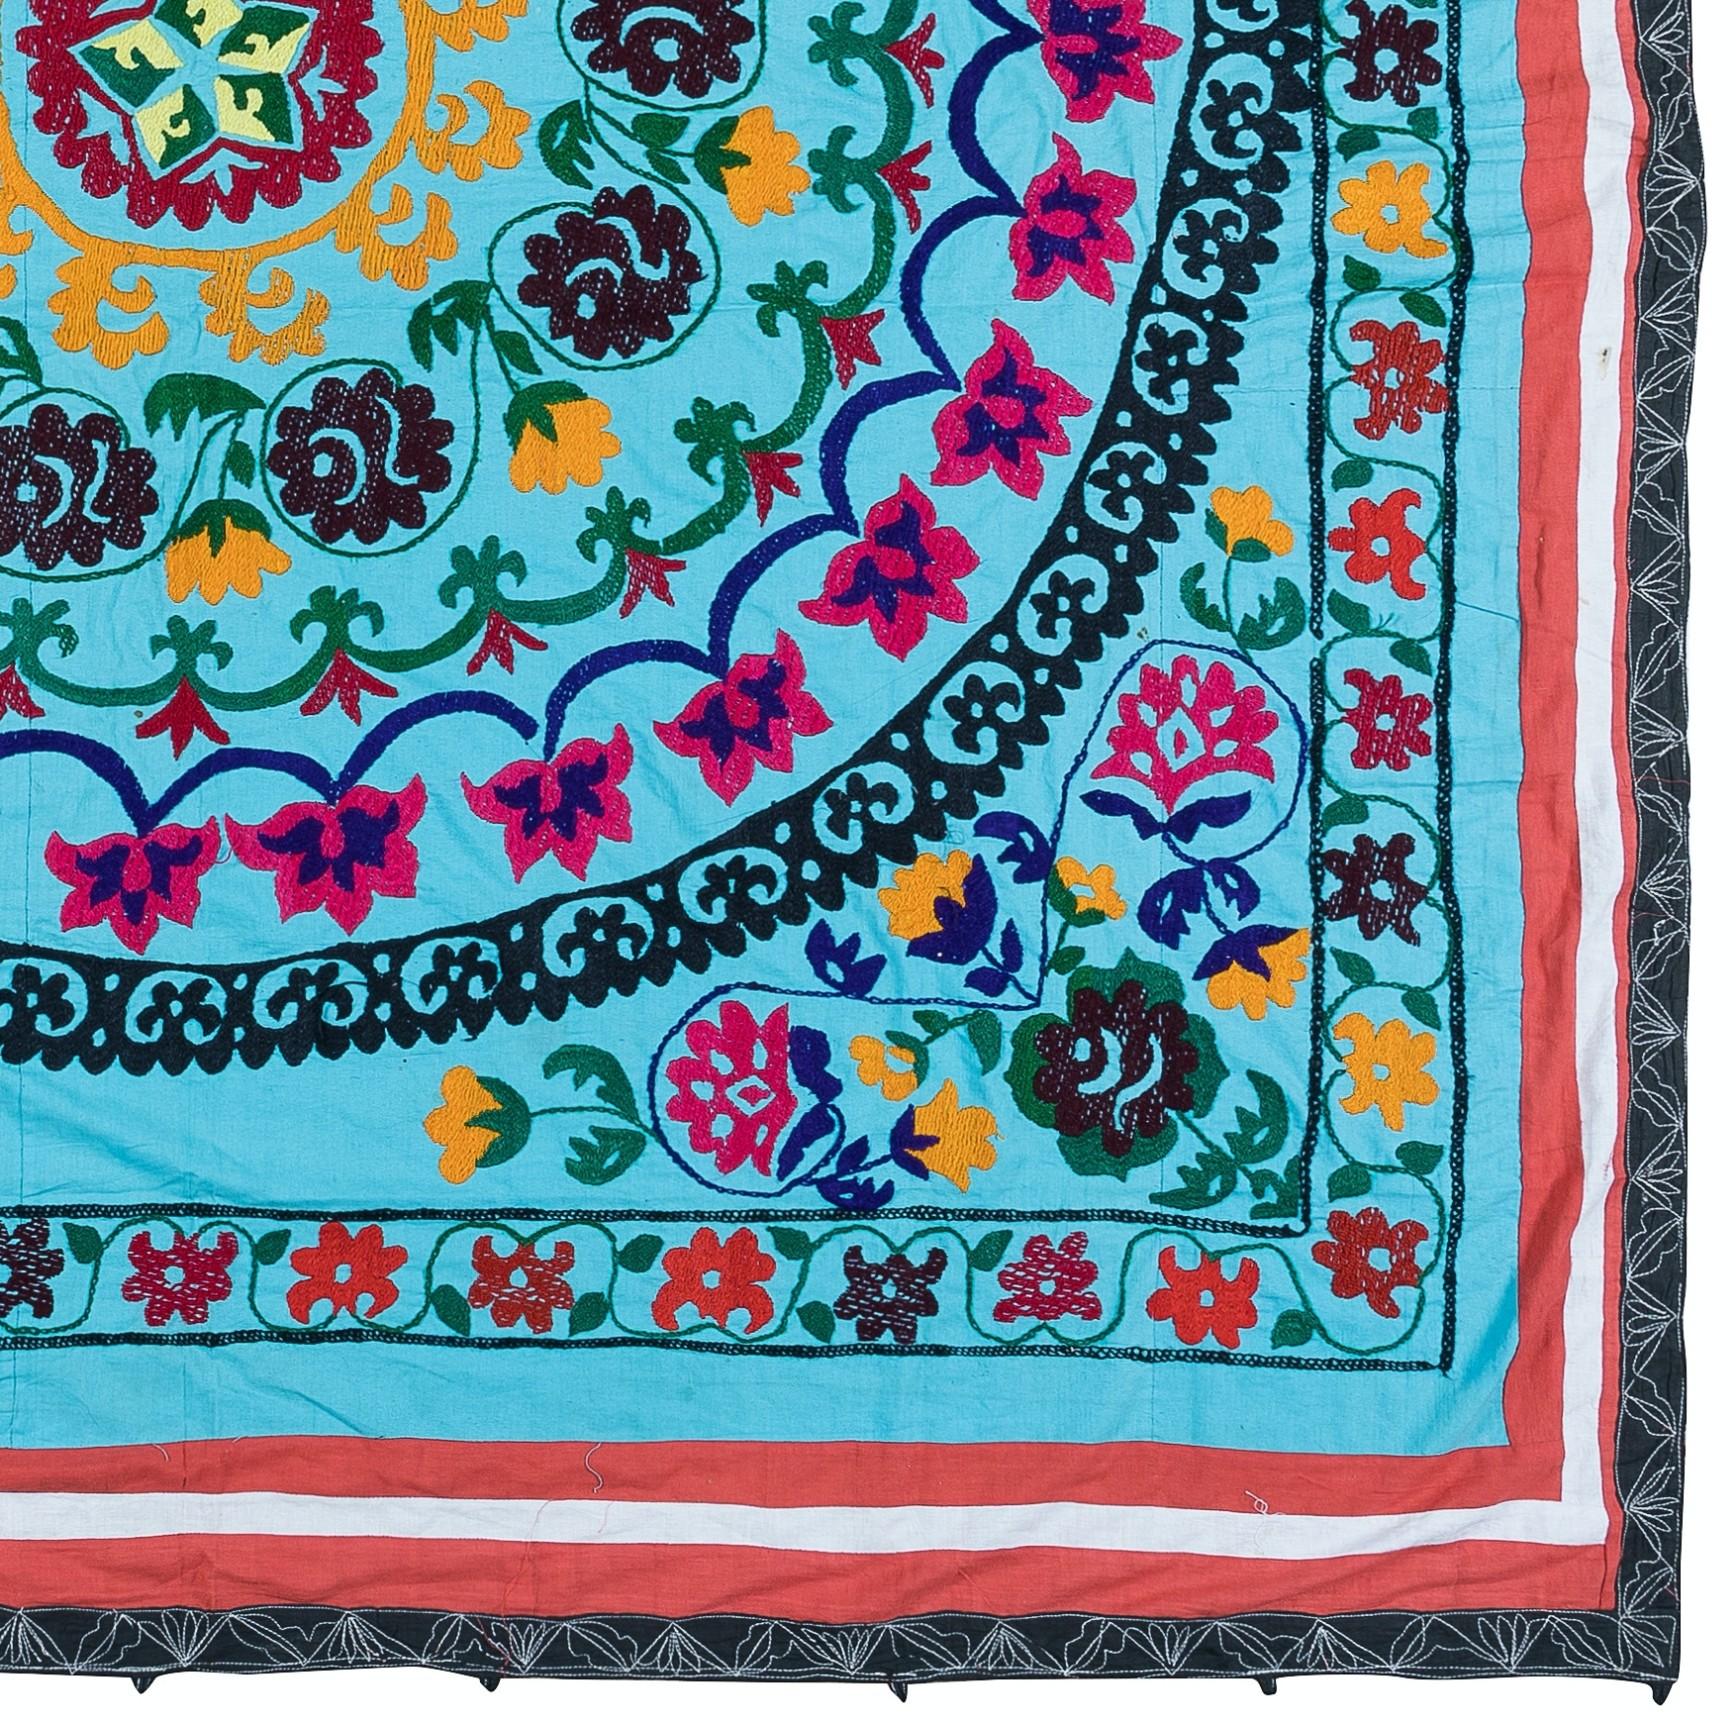 Uzbek Suzani Vintage Wall Hanging, Hand Embroidered Cotton Bed Cover in Blue